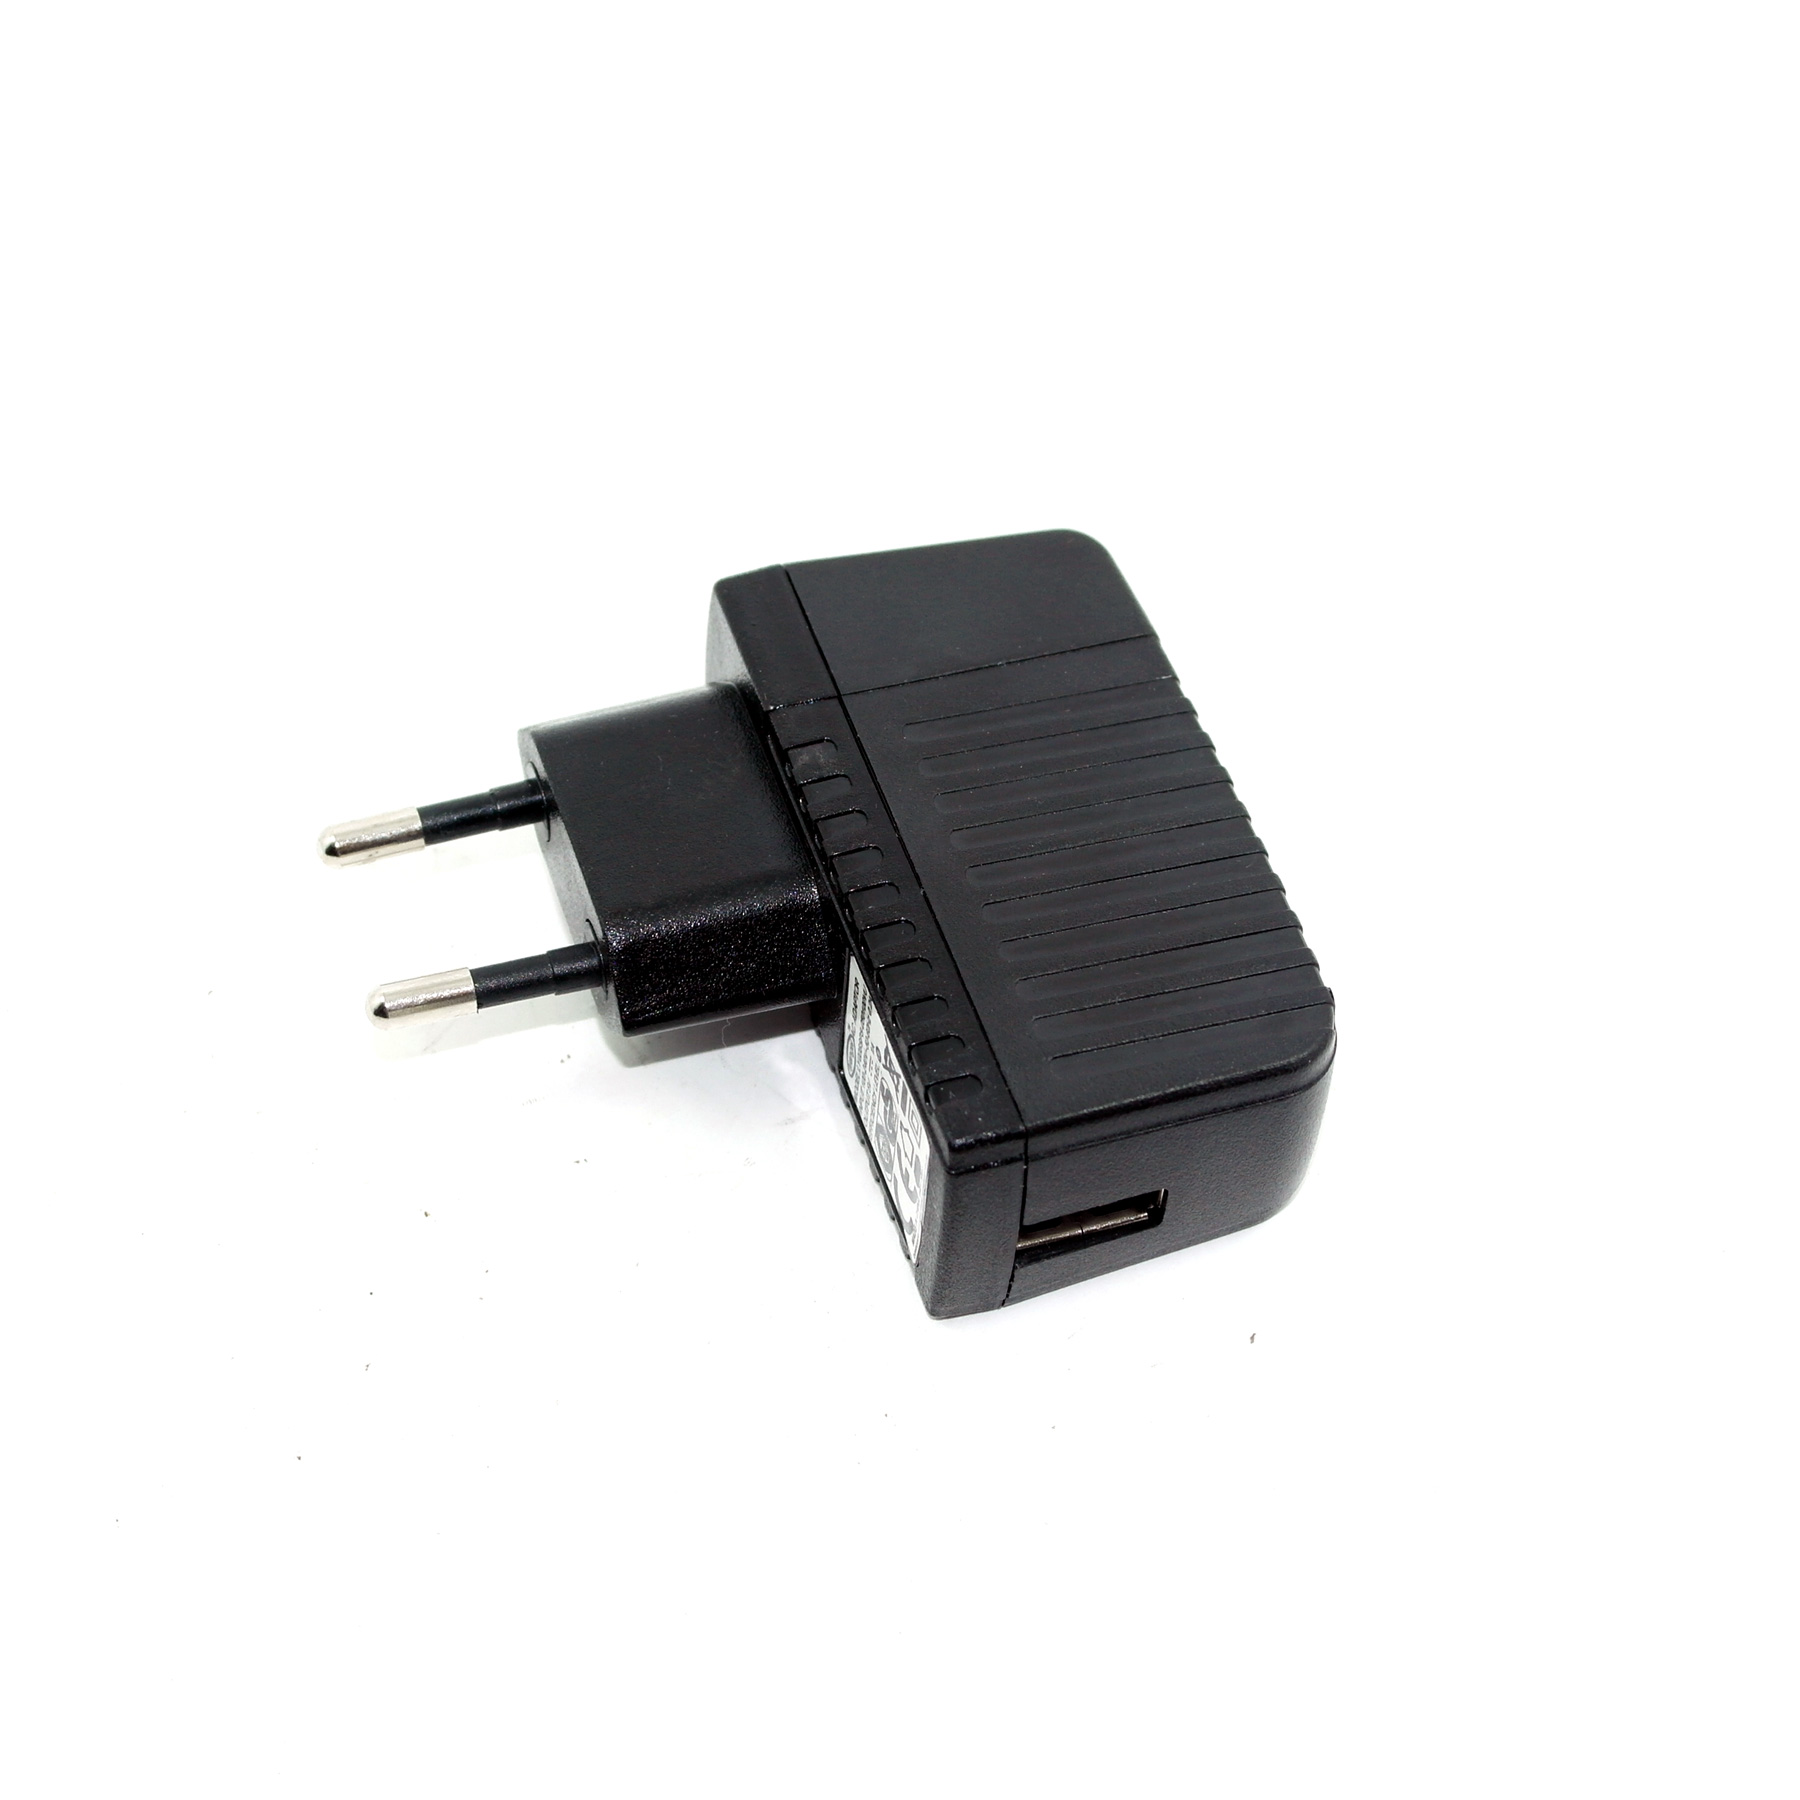 KRE-0502000,AC/DC adapters, USB charger, CE EMC ROHS VI 5V 2A 10W 